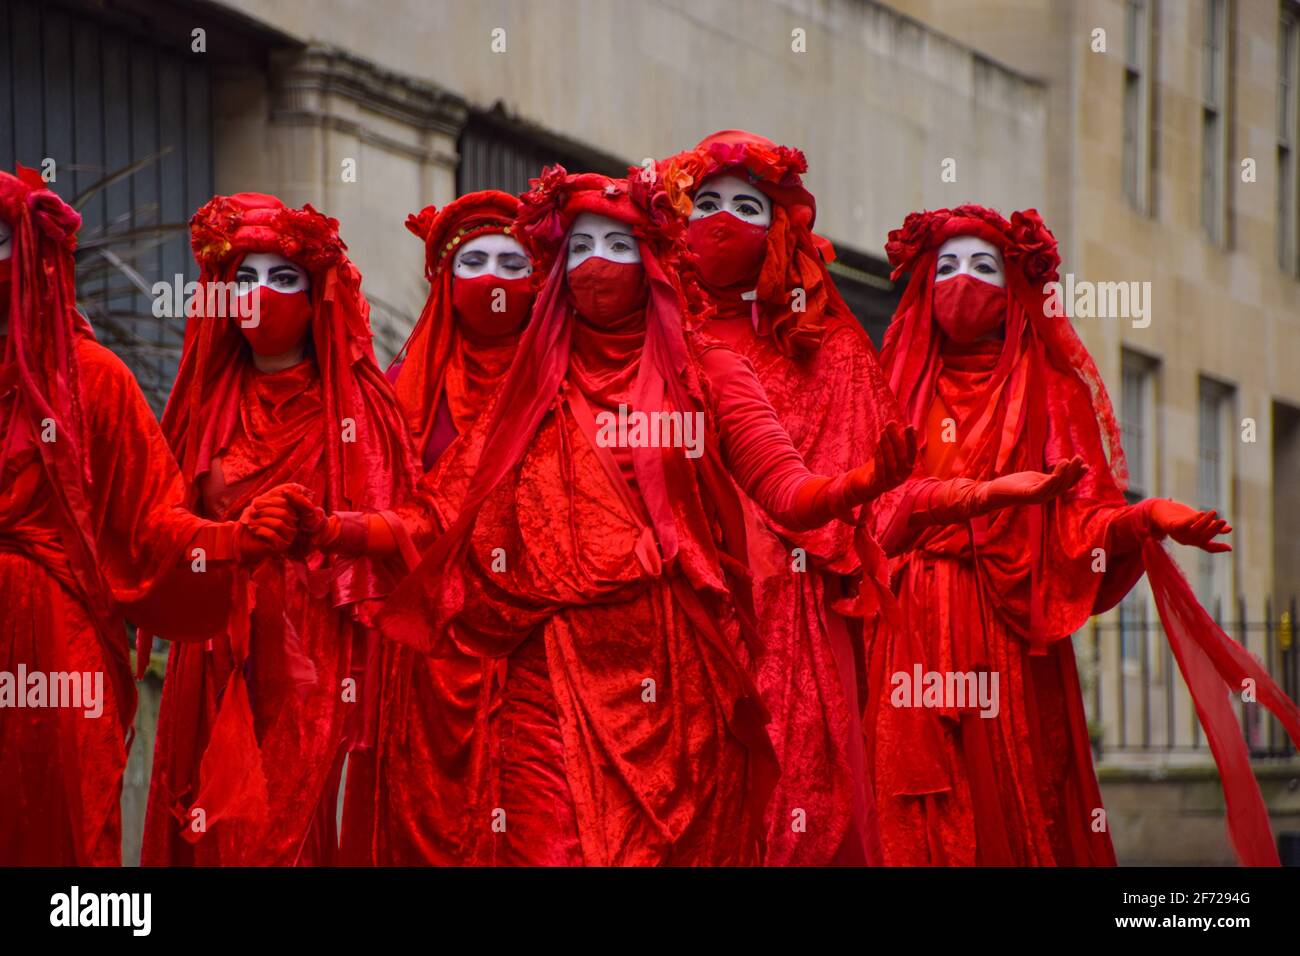 London, United Kingdom. 3rd April 2021. Extinction Rebellion's Red Rebel Brigade at the Kill The Bill protest in Mayfair. Stock Photo